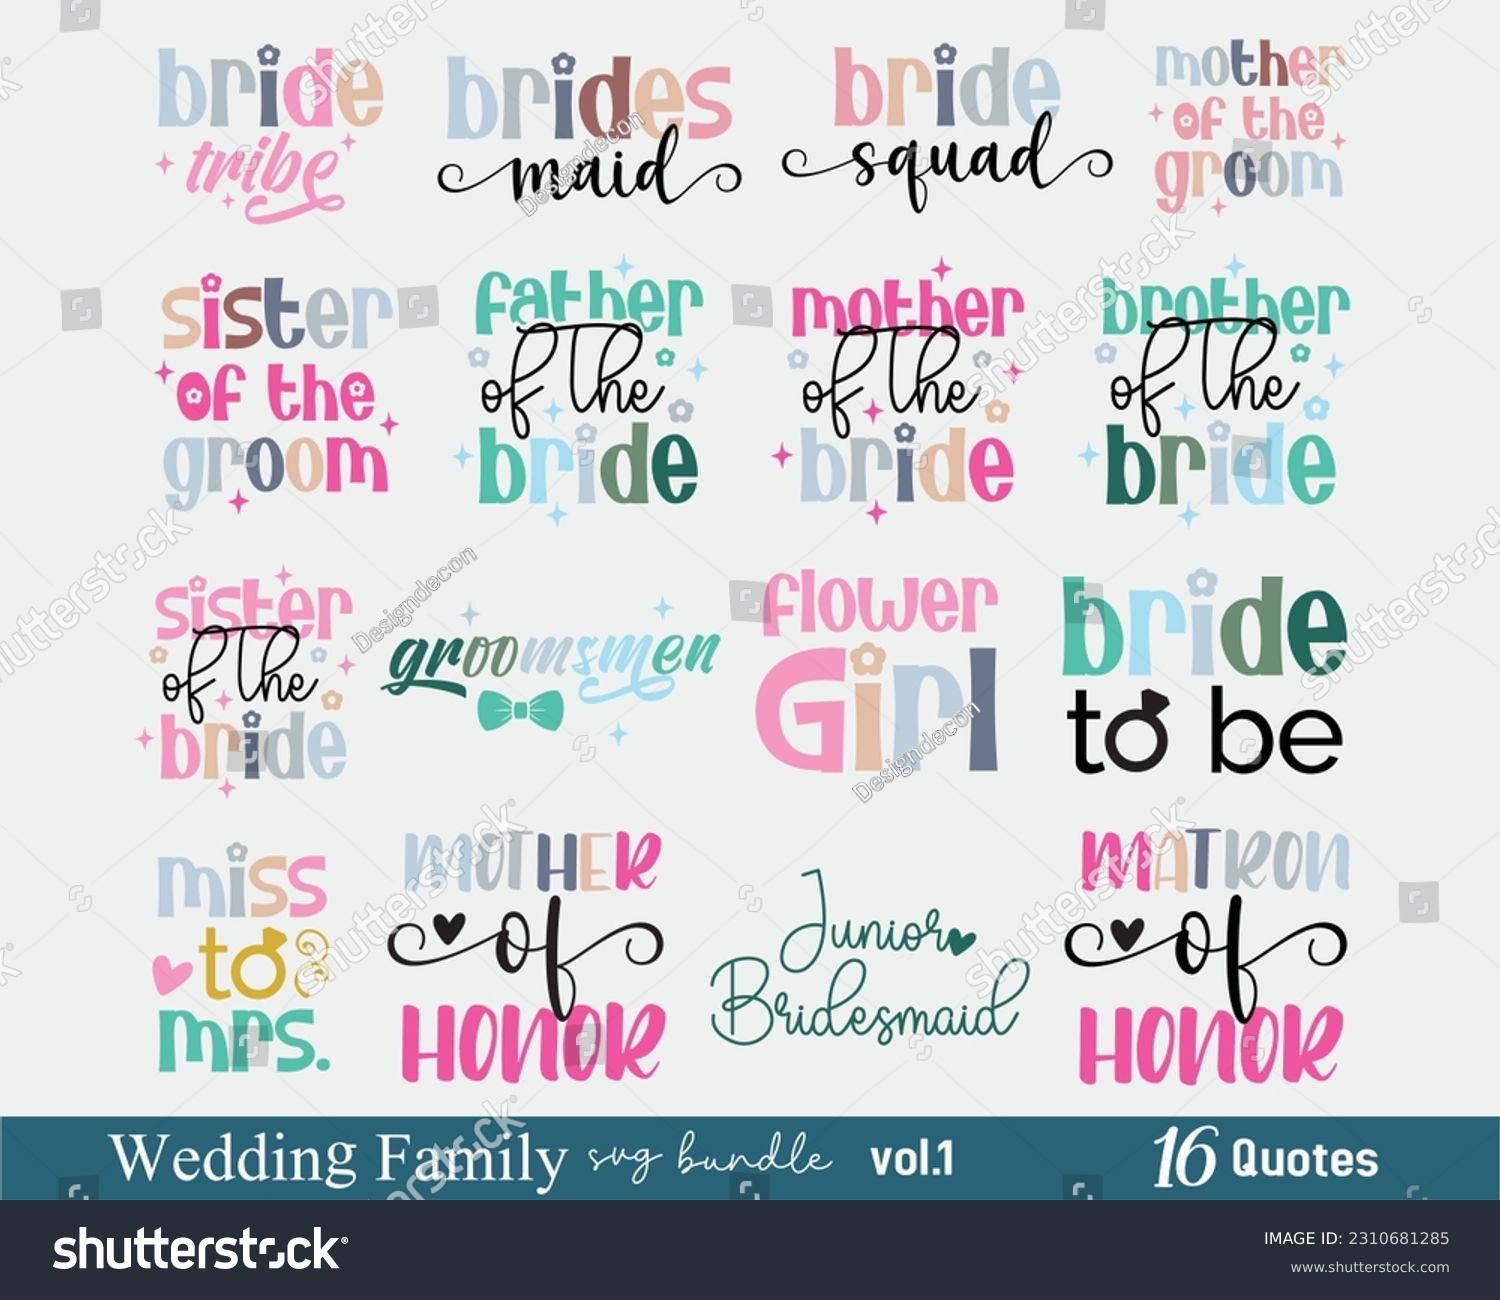 SVG of Wedding Family Bridal Party Quotes Collection Set Retro Typographic Art Bundle on White Background svg